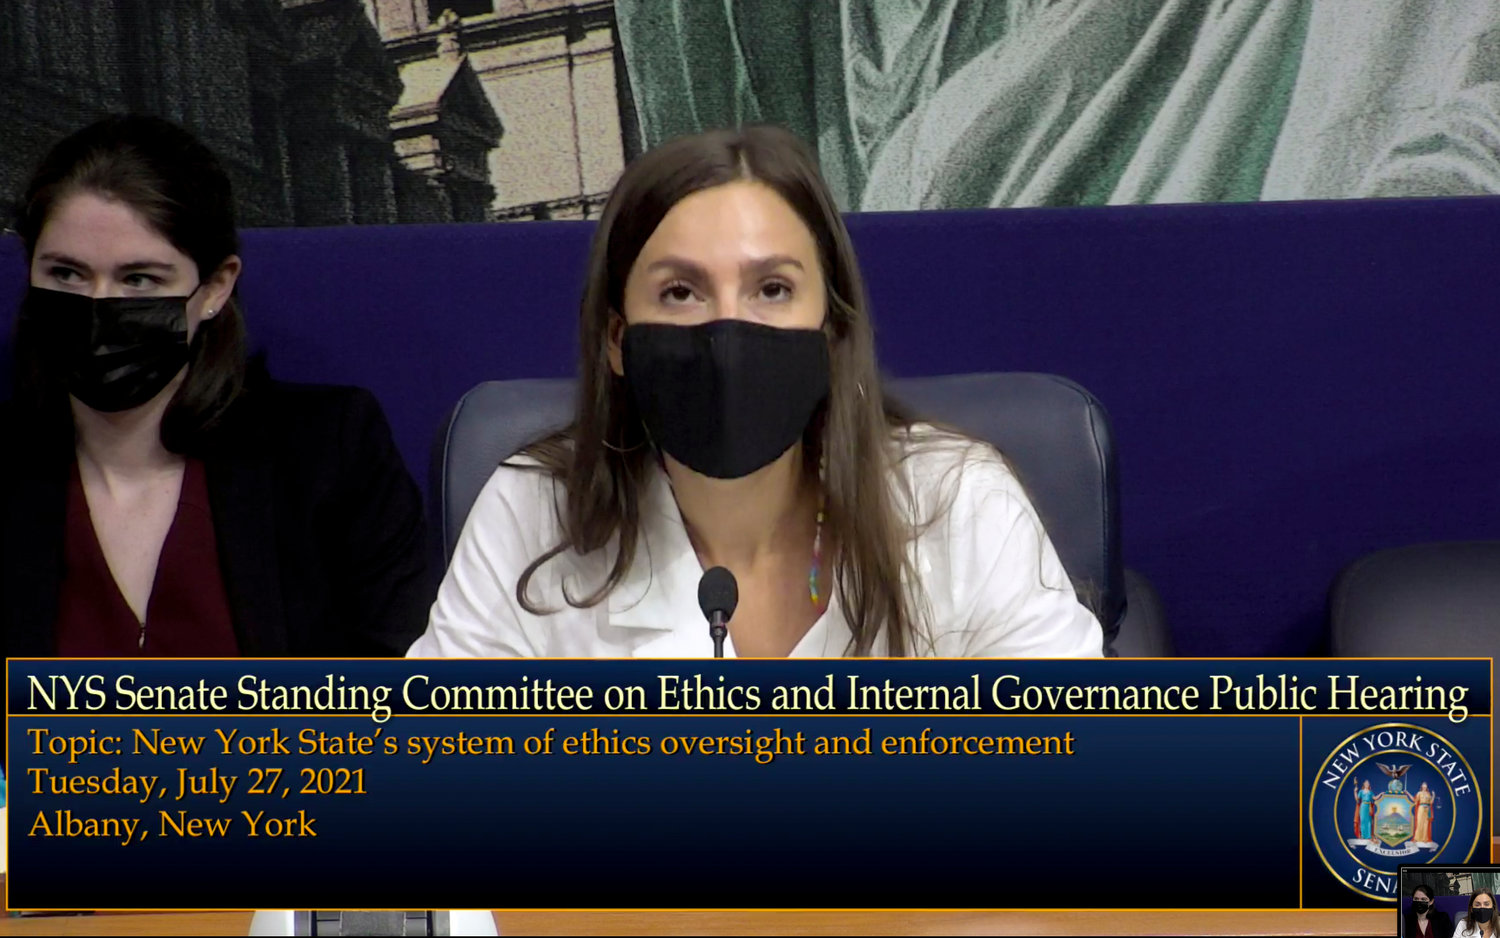 State Sen. Alessandra Biaggi looked into alleged issues with the Joint Commission on Public Ethics, the state’s ethics watchdog, late last month. Biaggi has sponsored a bill she says would fix many of JCOPE’s structural issues that prevent it from being truly independent.